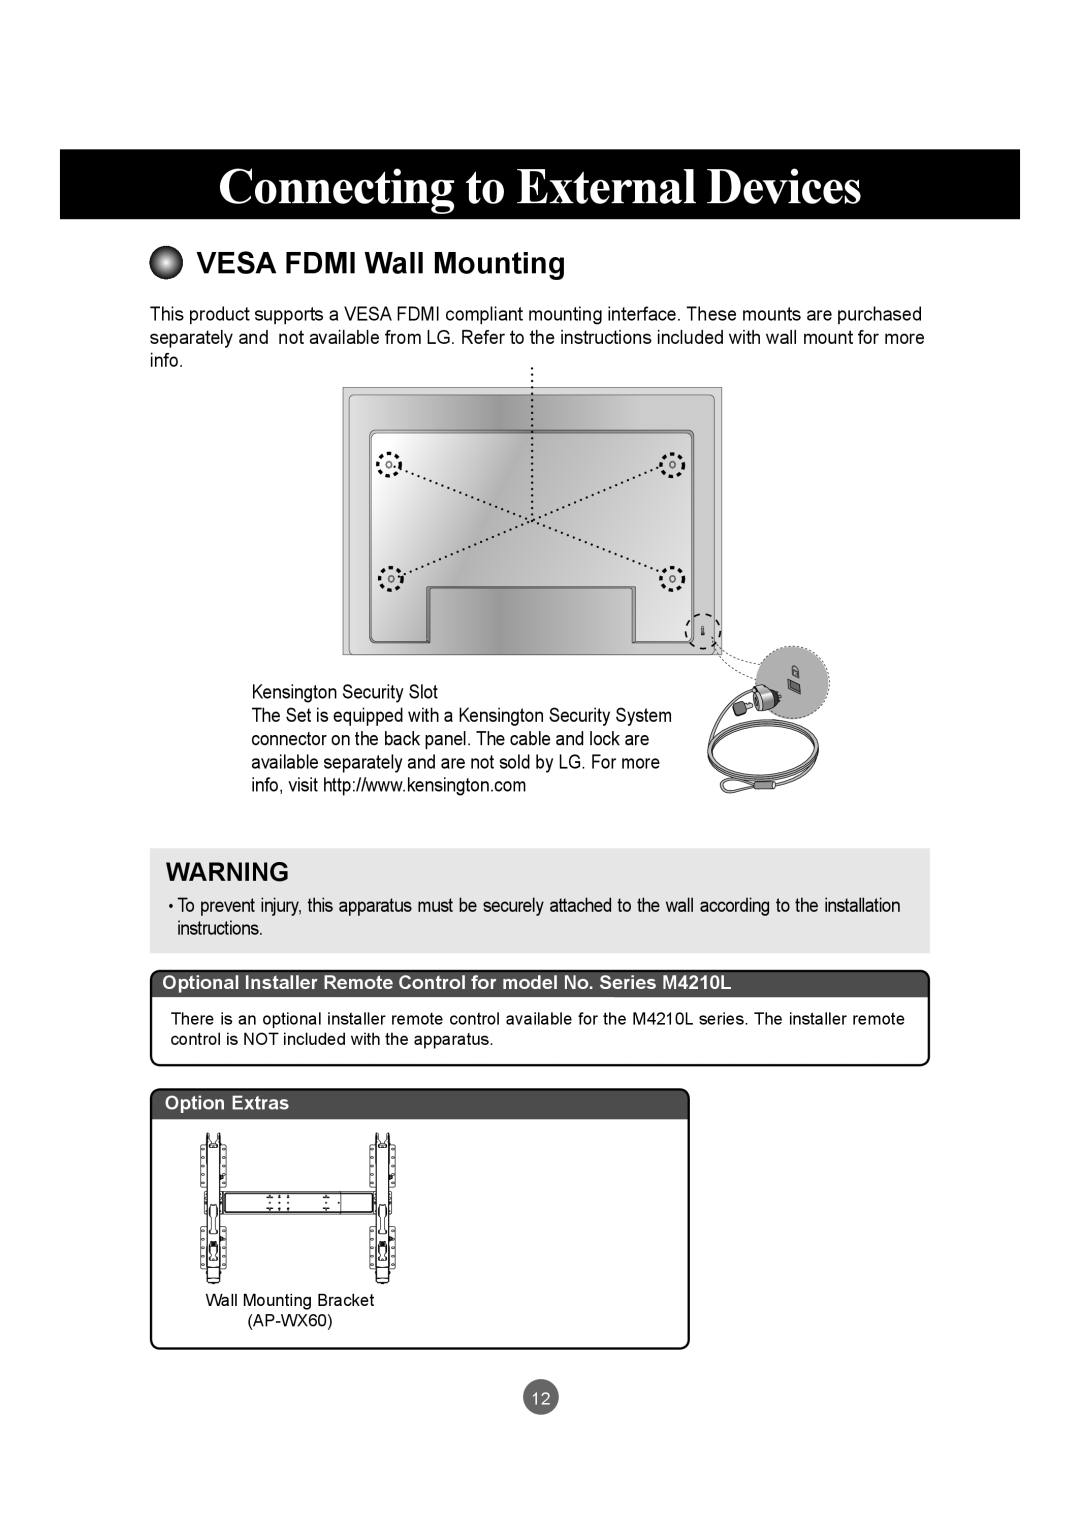 LG Electronics M4210LCBA owner manual VESA FDMI Wall Mounting, Connecting to External Devices, Option Extras 